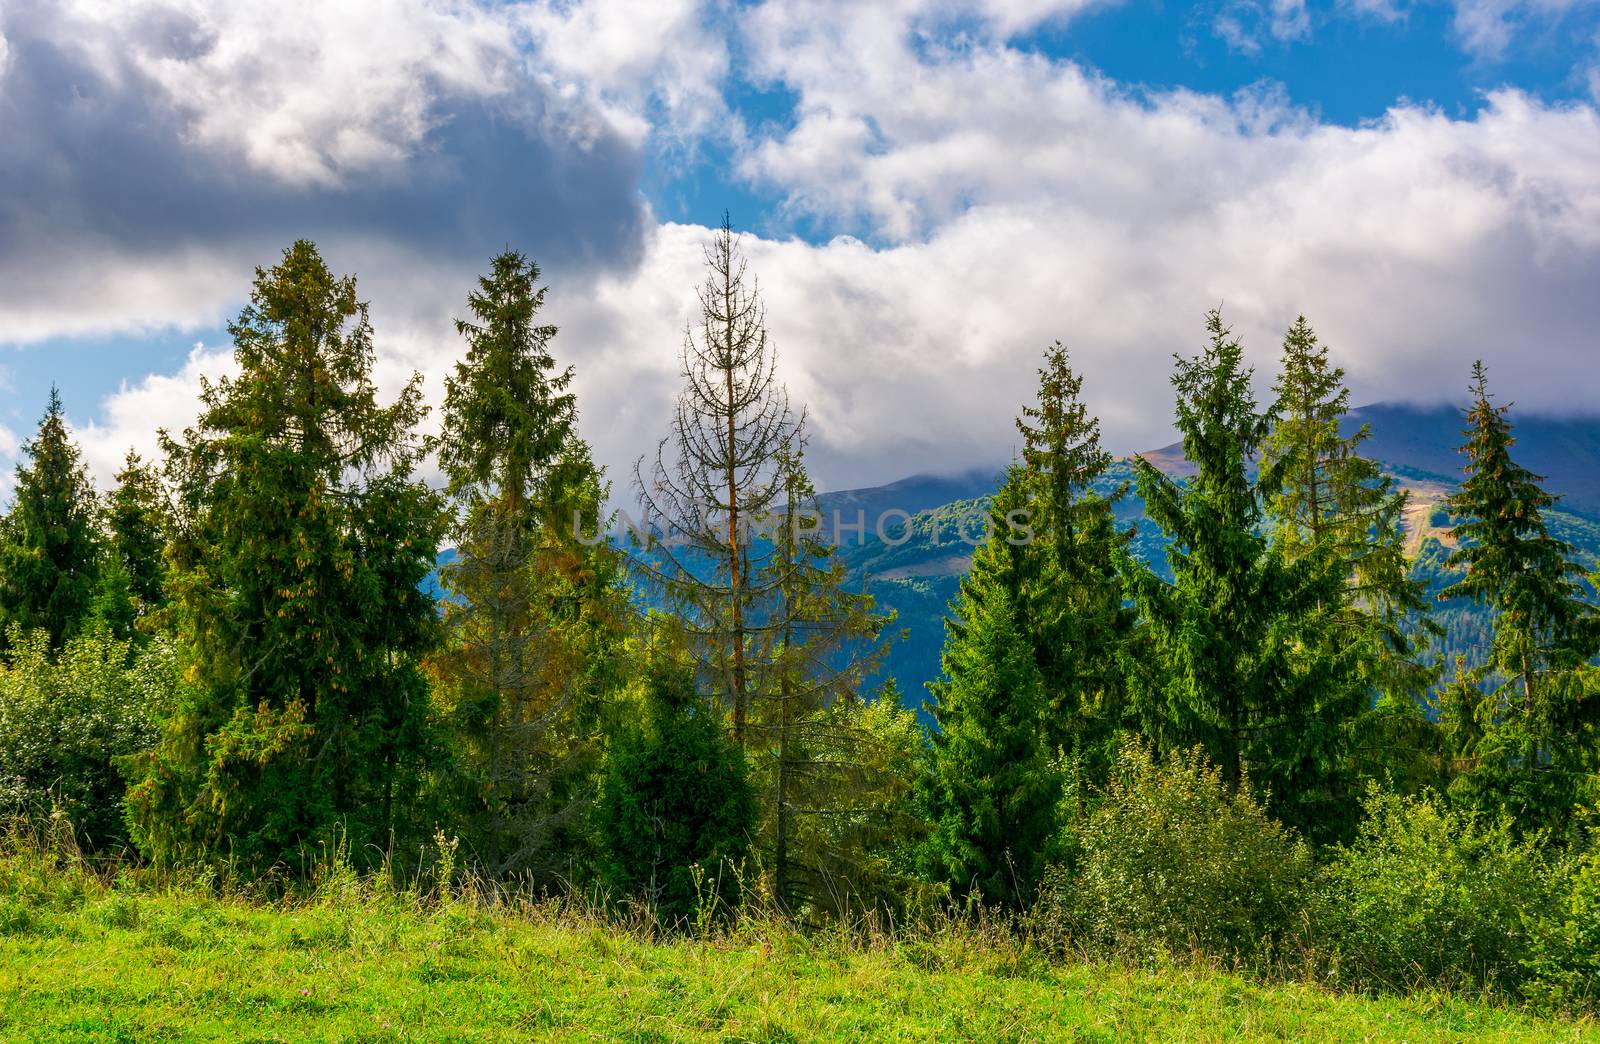 spruce forest on the grassy hillside in mountains by Pellinni